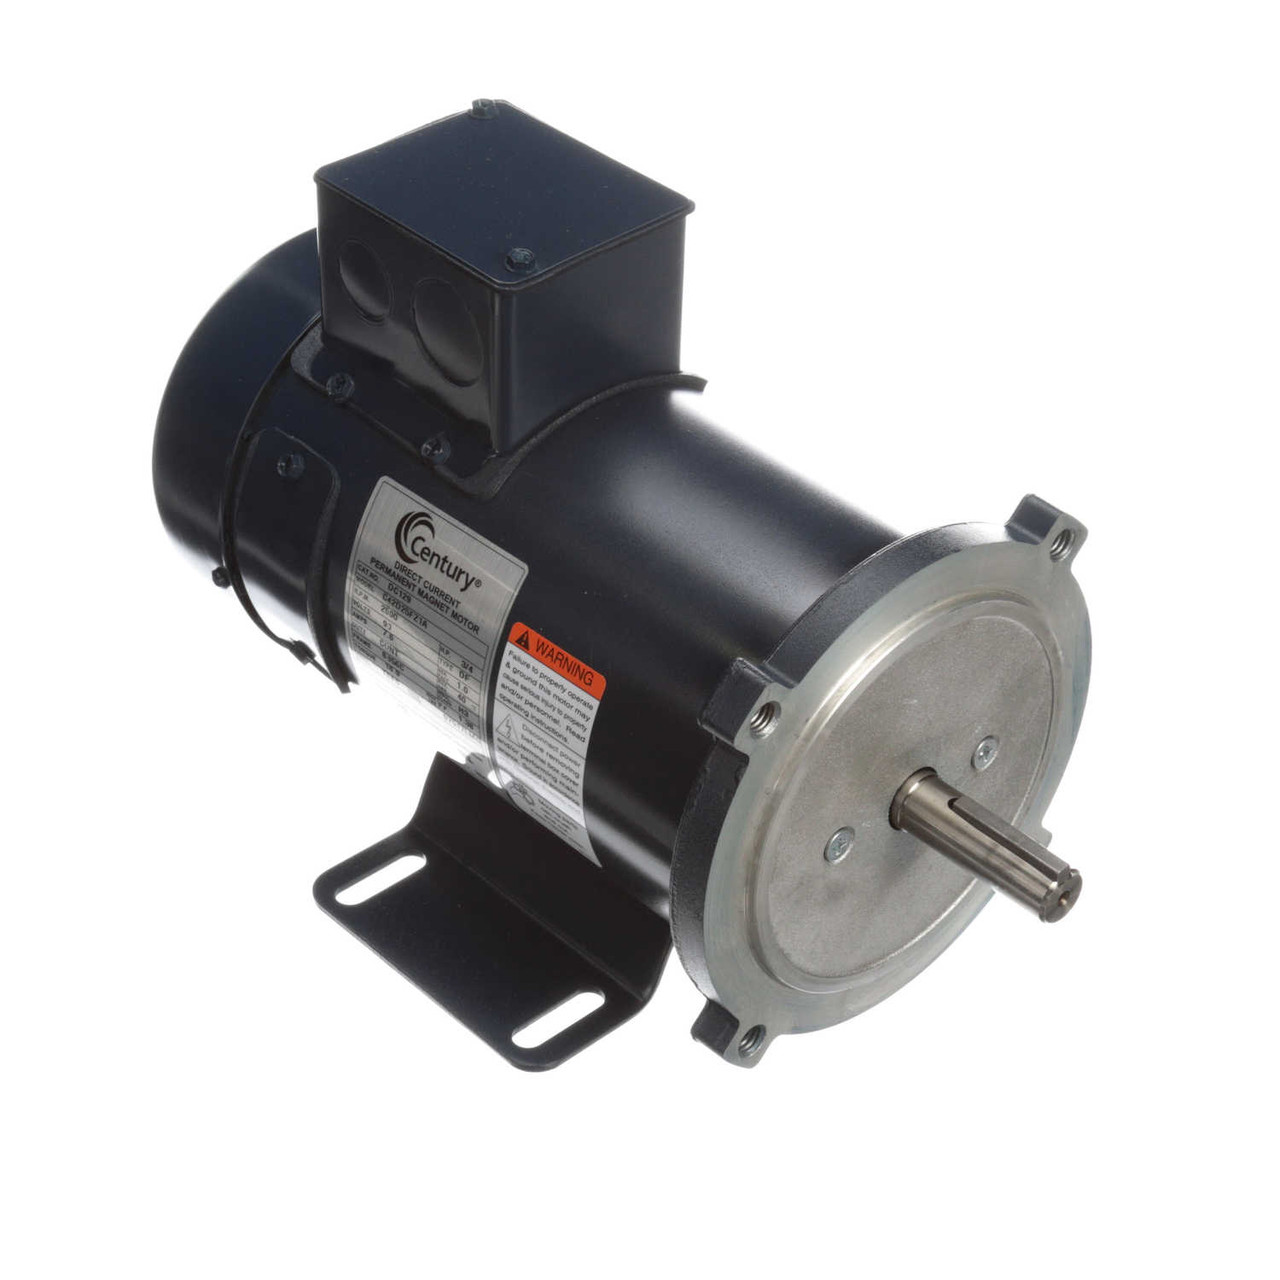 DC129 Permanent Magnet SCR Rated Totally Enclosed C-Face Motor 3/4 HP